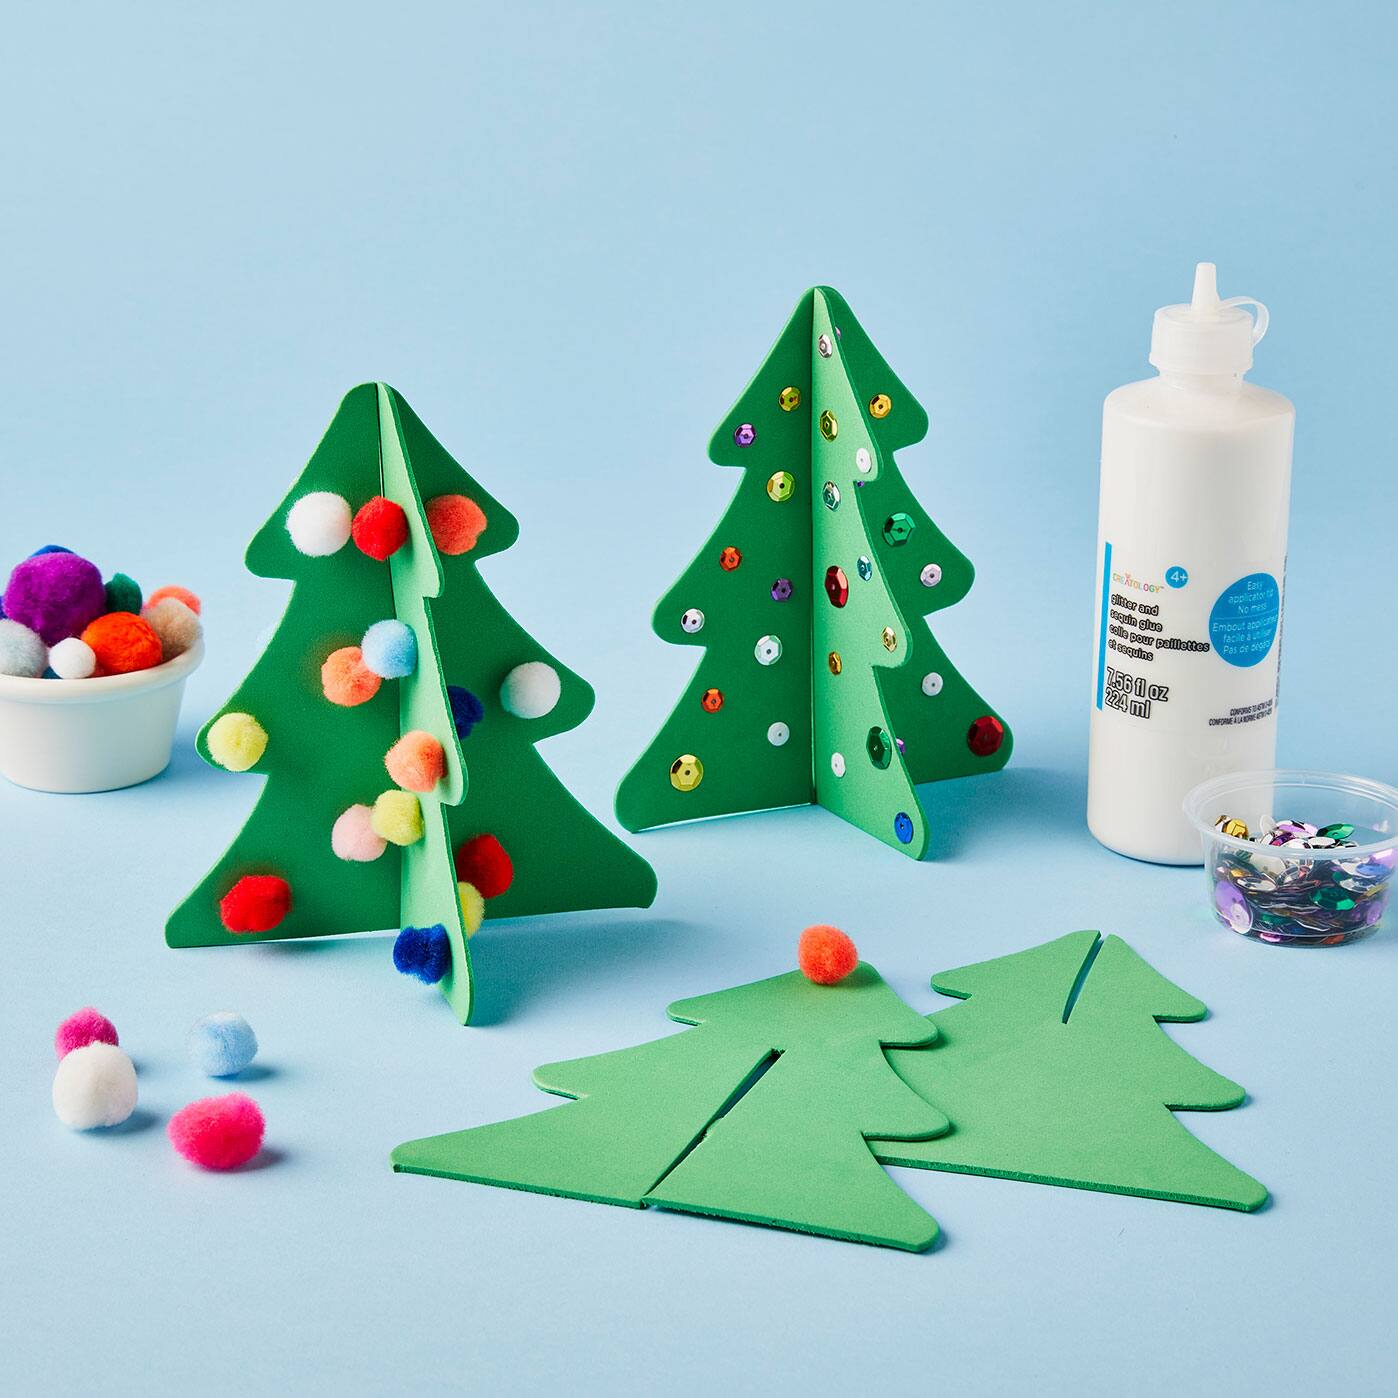 Foam Decorated Christmas Trees, Projects